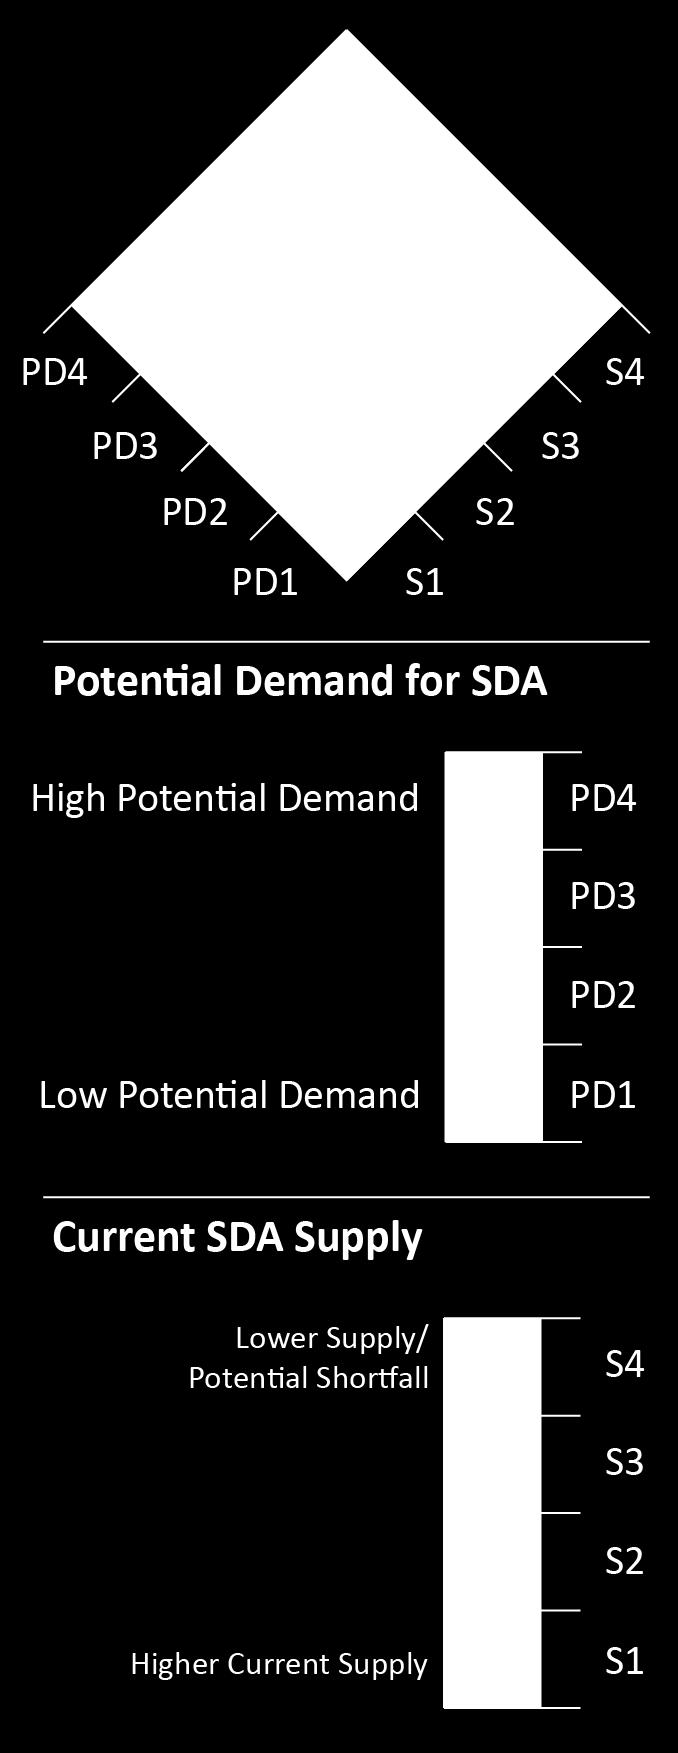 However, data analysis shows that the need for SDA is not proportionally distributed across the country. Rather there are areas of concentrated demand.